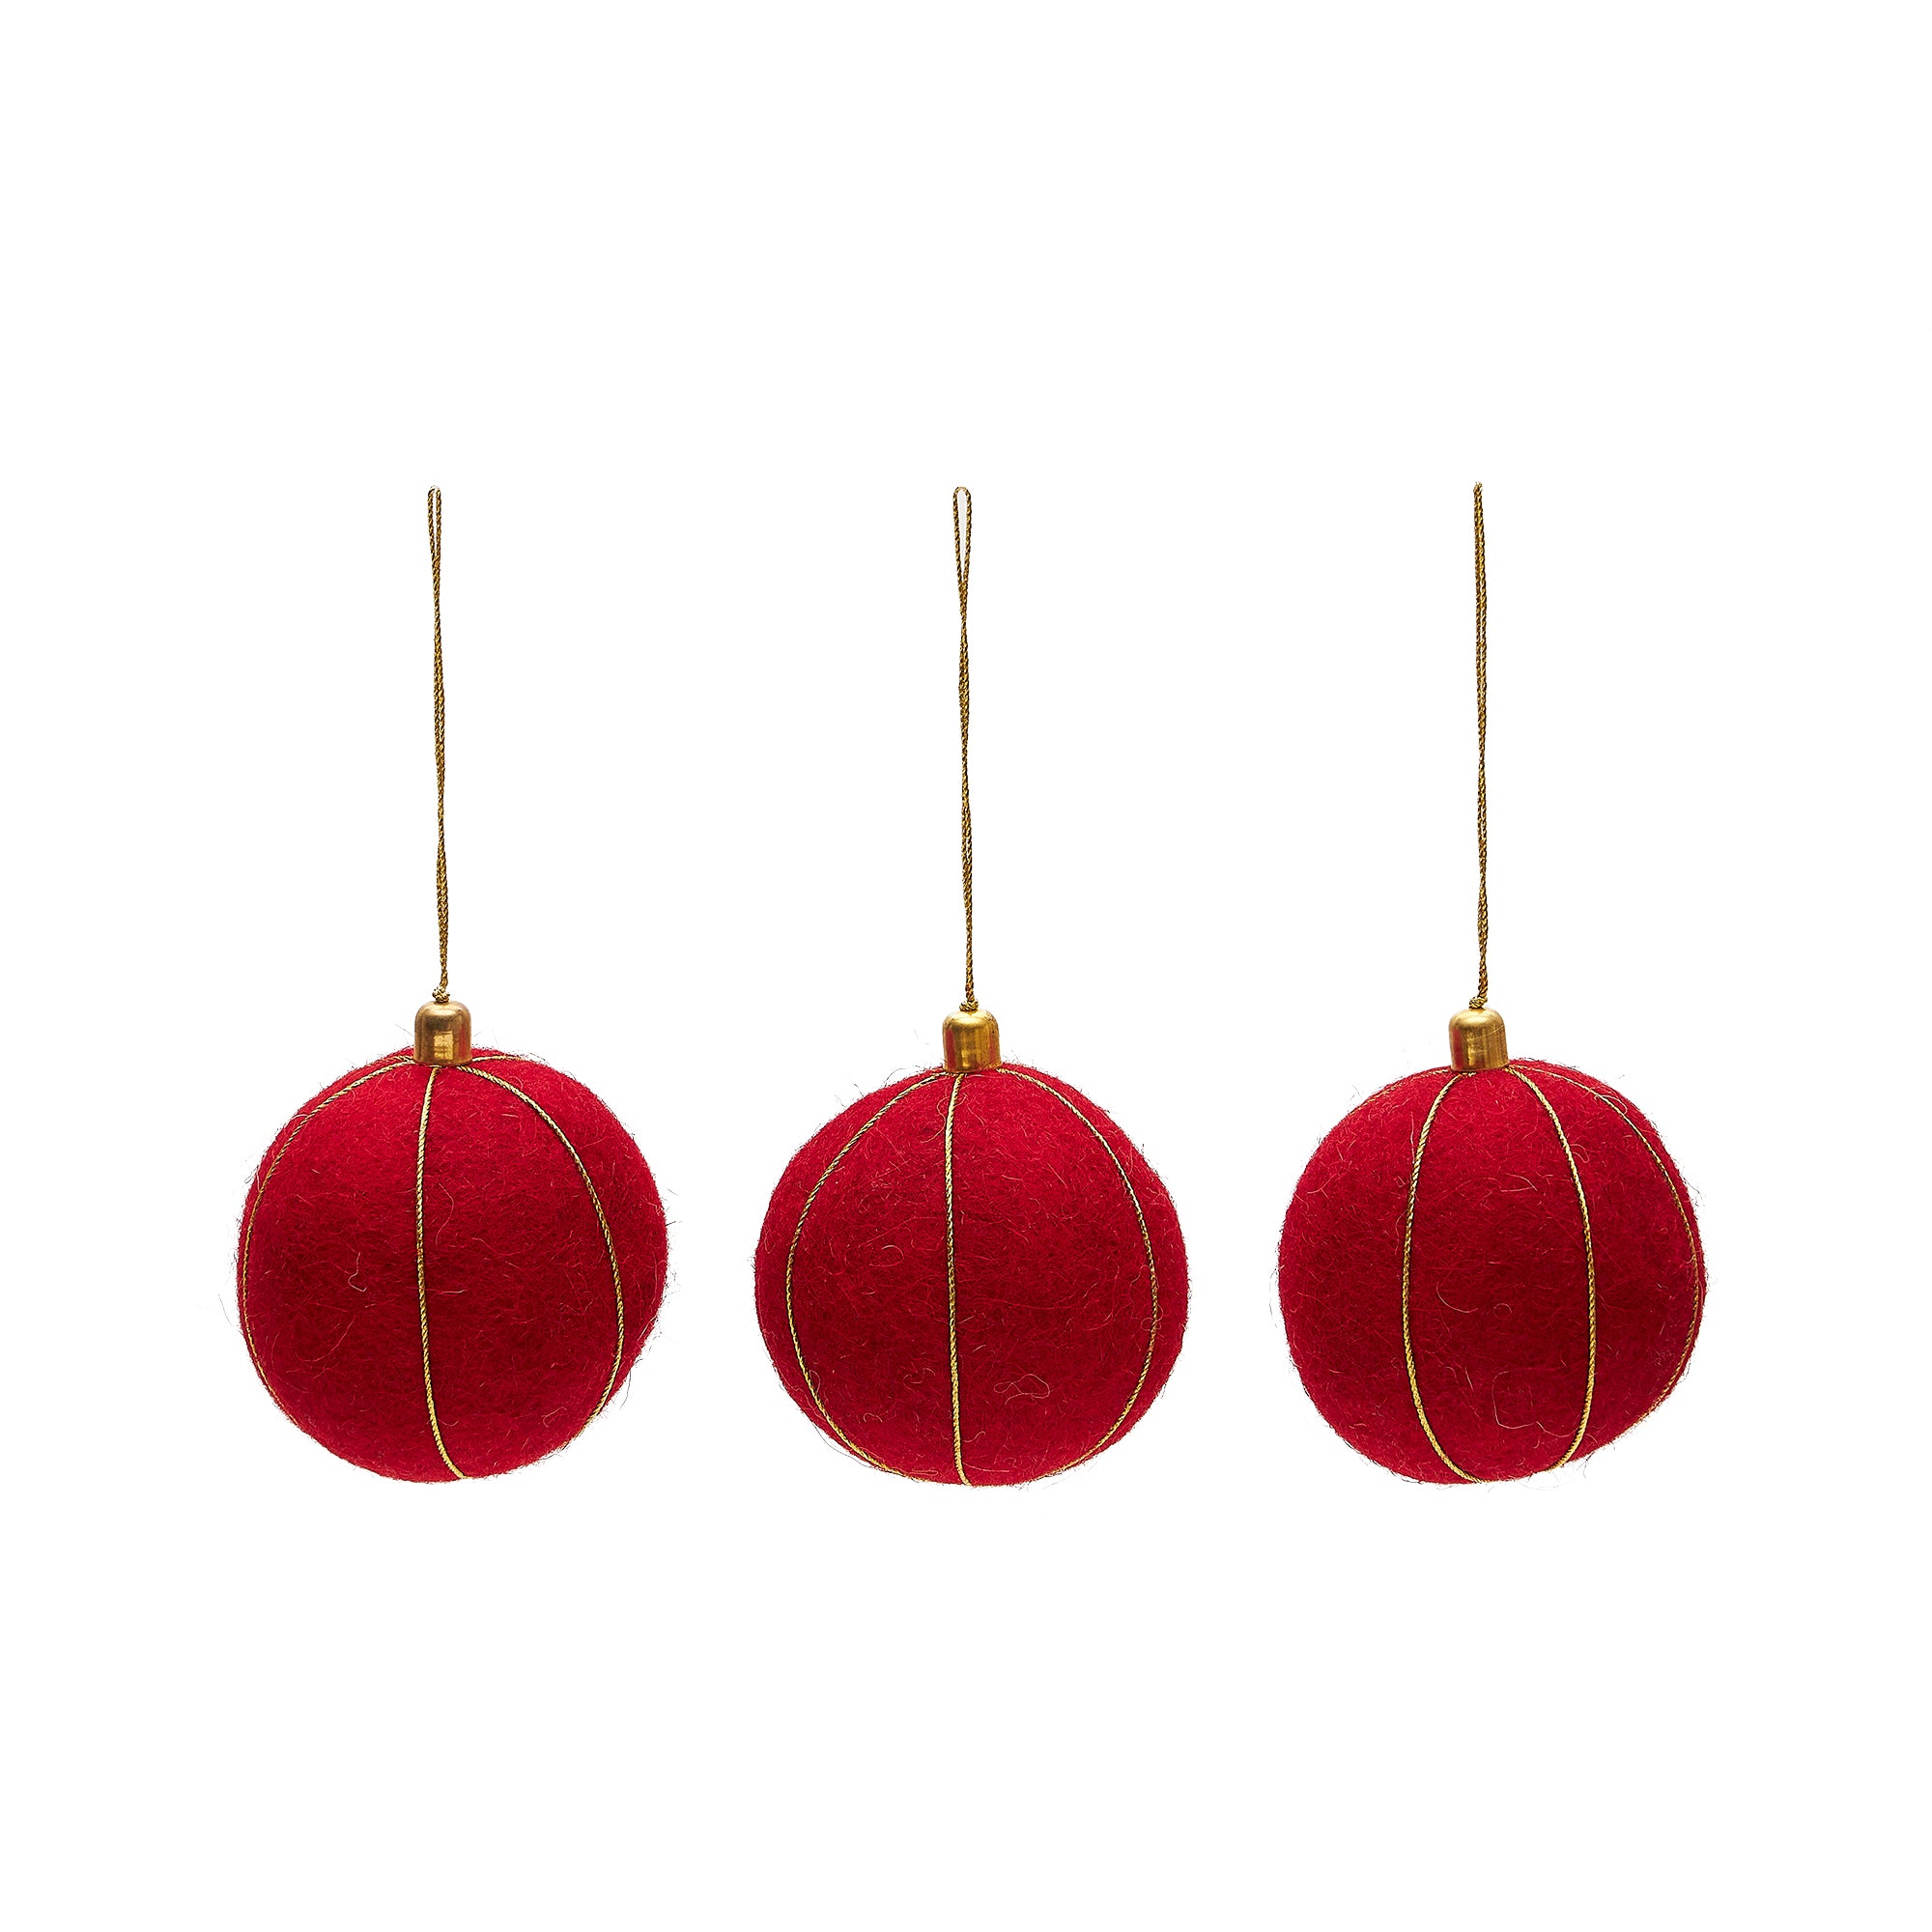 Breshi set of 3 large red decorative pendant balls with gold details 